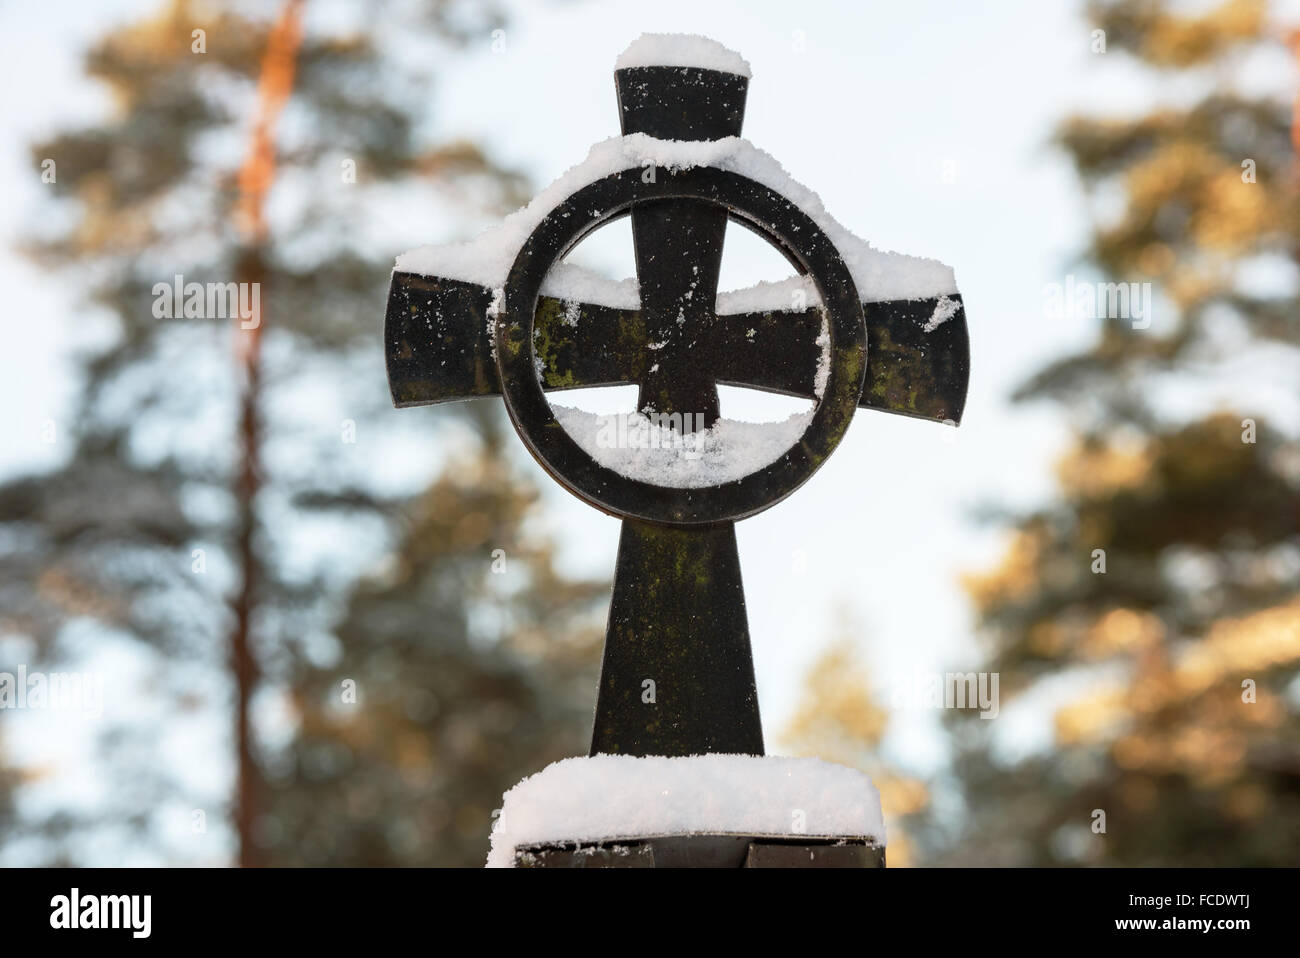 A black Christian iron cross with a circle. Cross is covered with a blanket of snow. Tree in background. Stock Photo